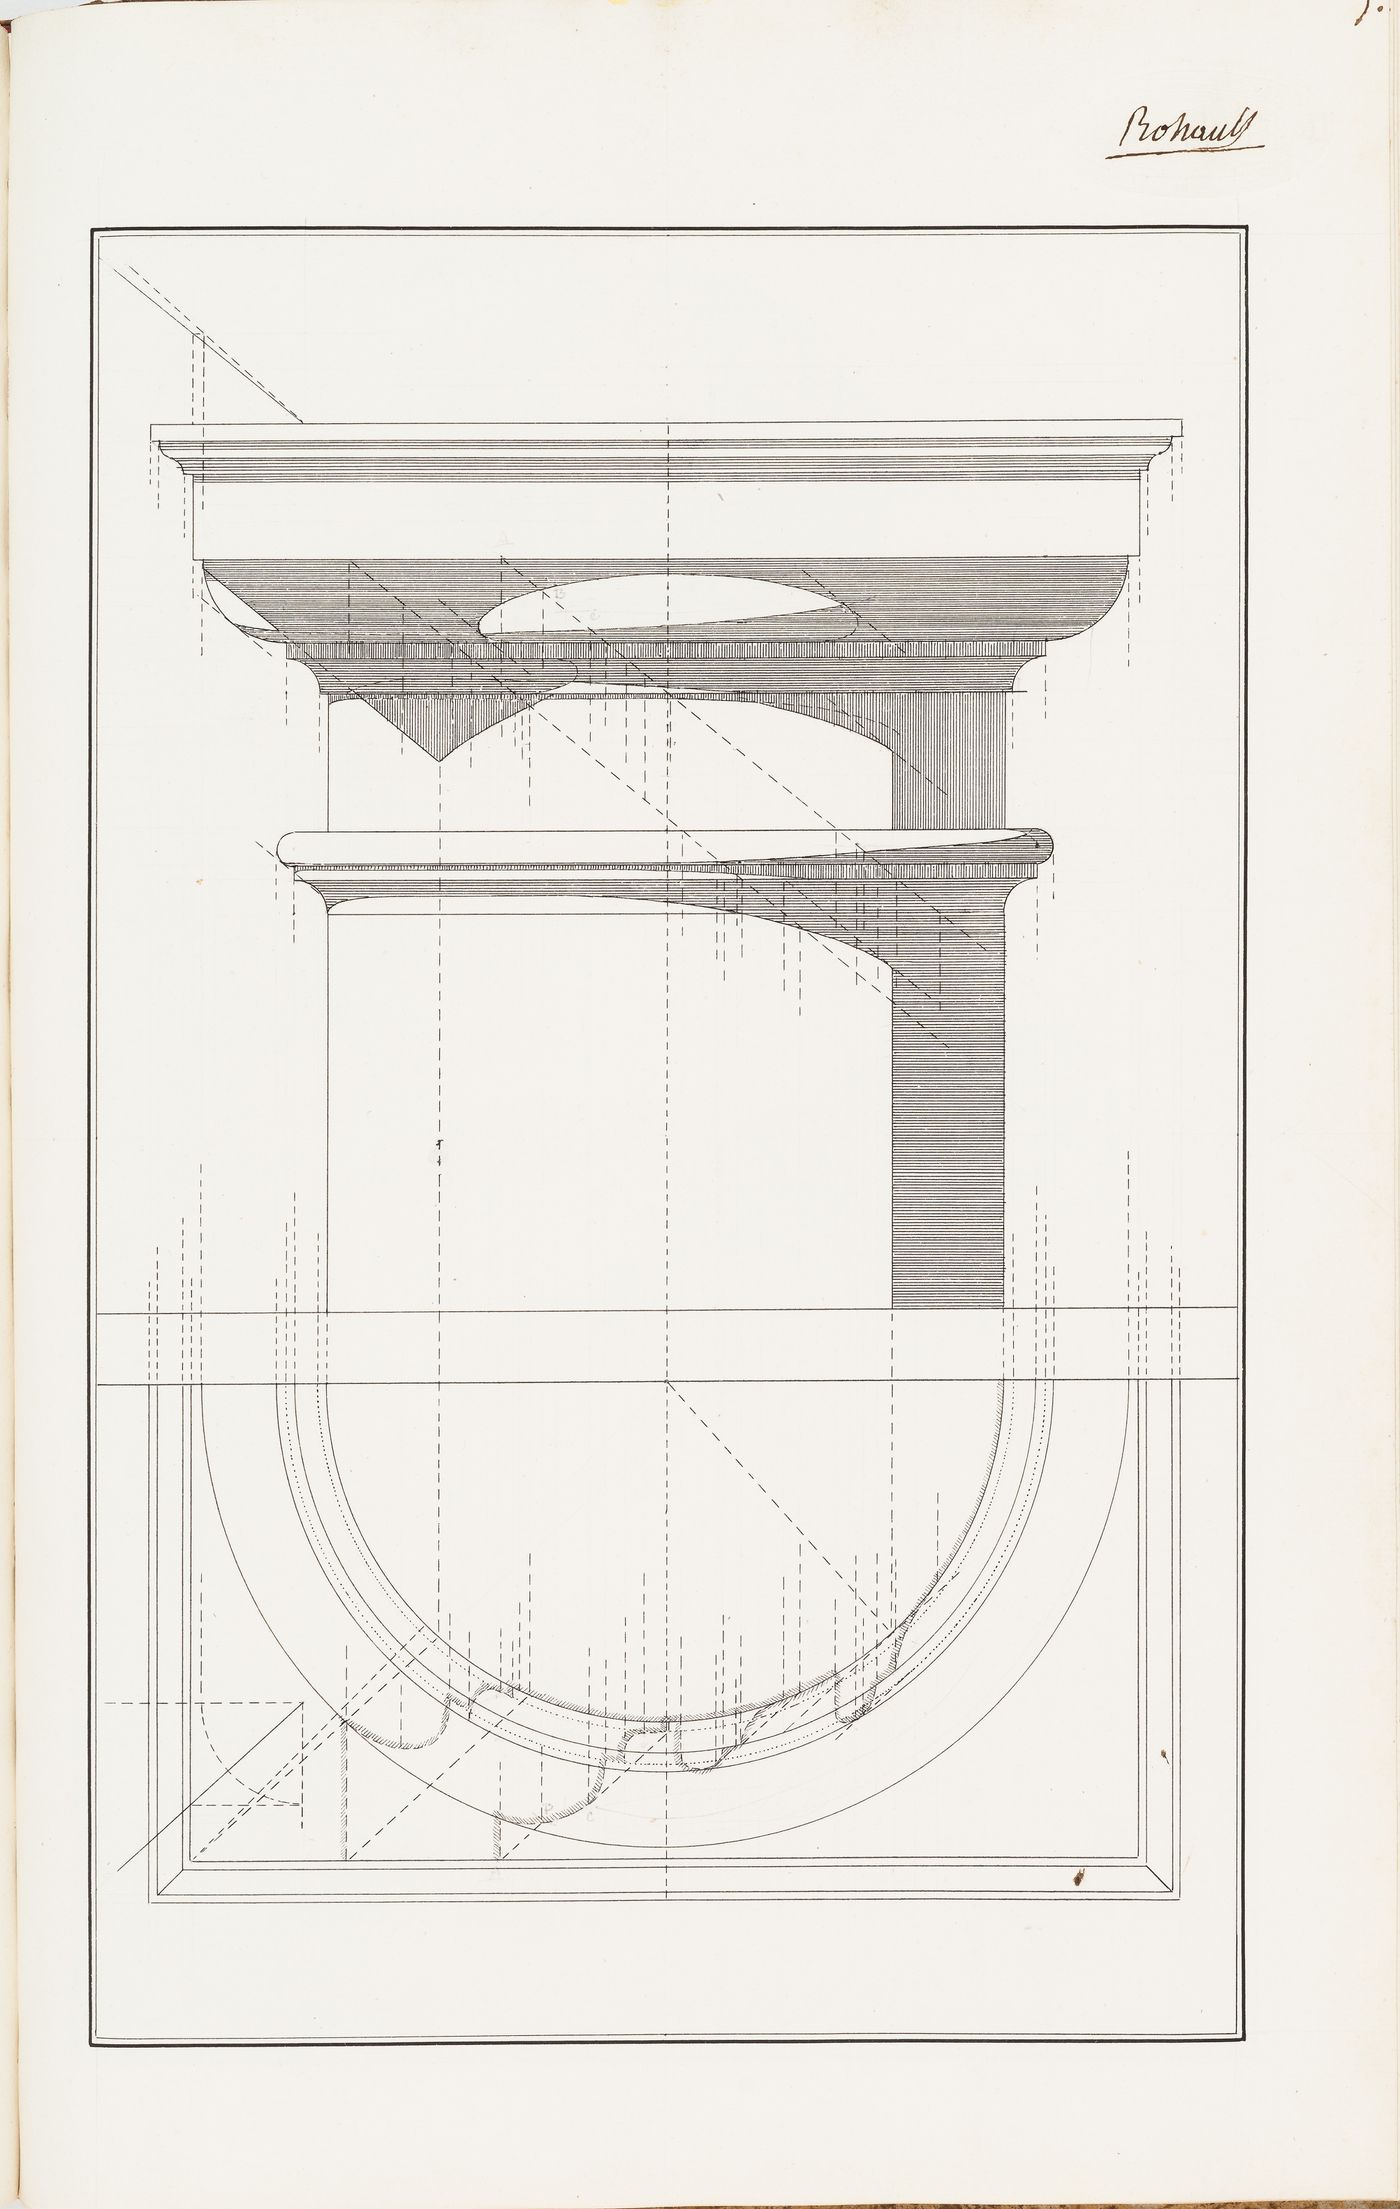 Elevation for a column and capital, an exercise in draughting shadows